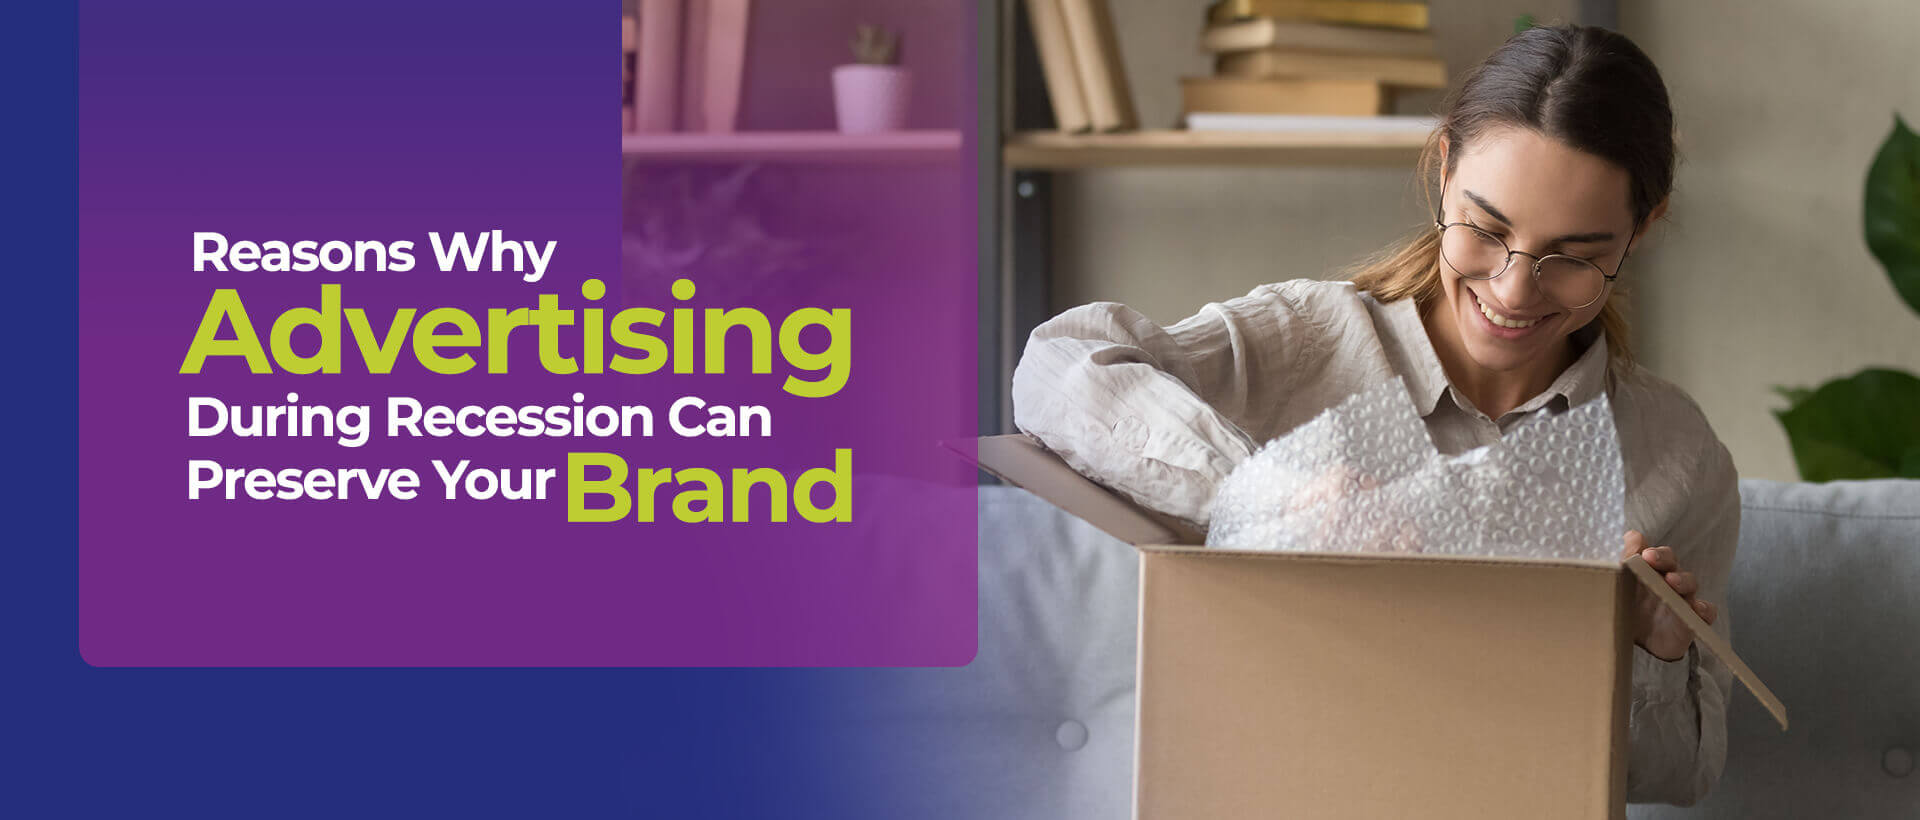 Reasons Why Advertising During Recession Can Preserve Your Brand